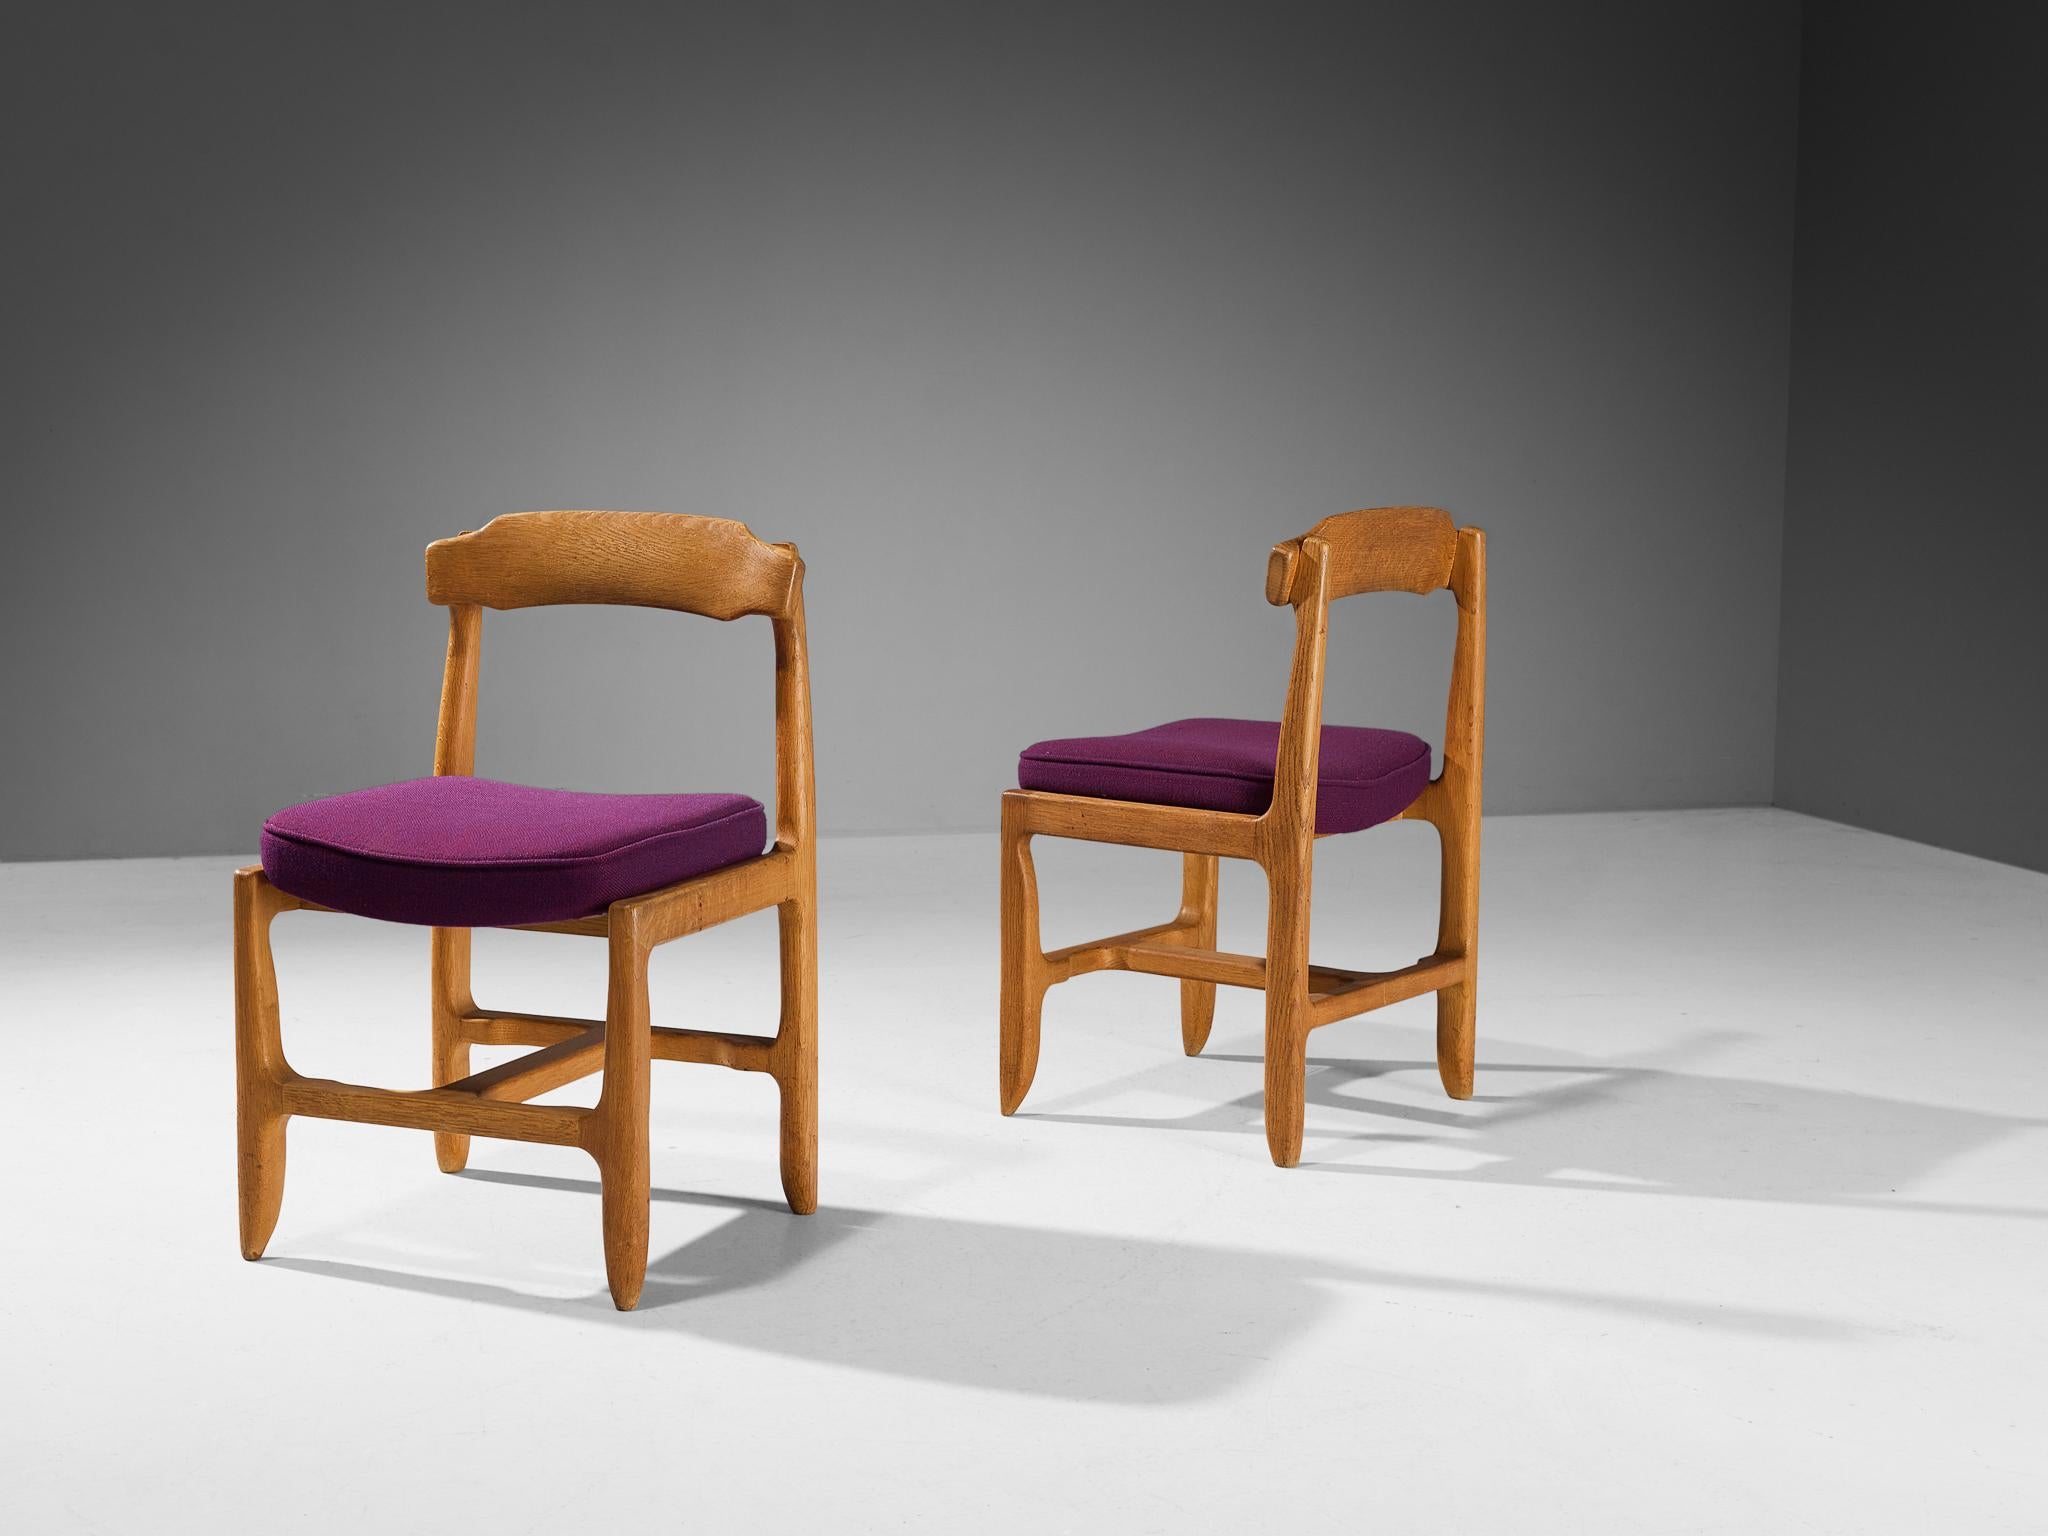 Guillerme et Chambron, pair of dining chairs, solid oak, fabric, 1960s

These distinctive chairs in solid oak are by the French designer duo Jacques Chambron and Robert Guillerme. These dining chair shows organic, tender lines almost in every aspect